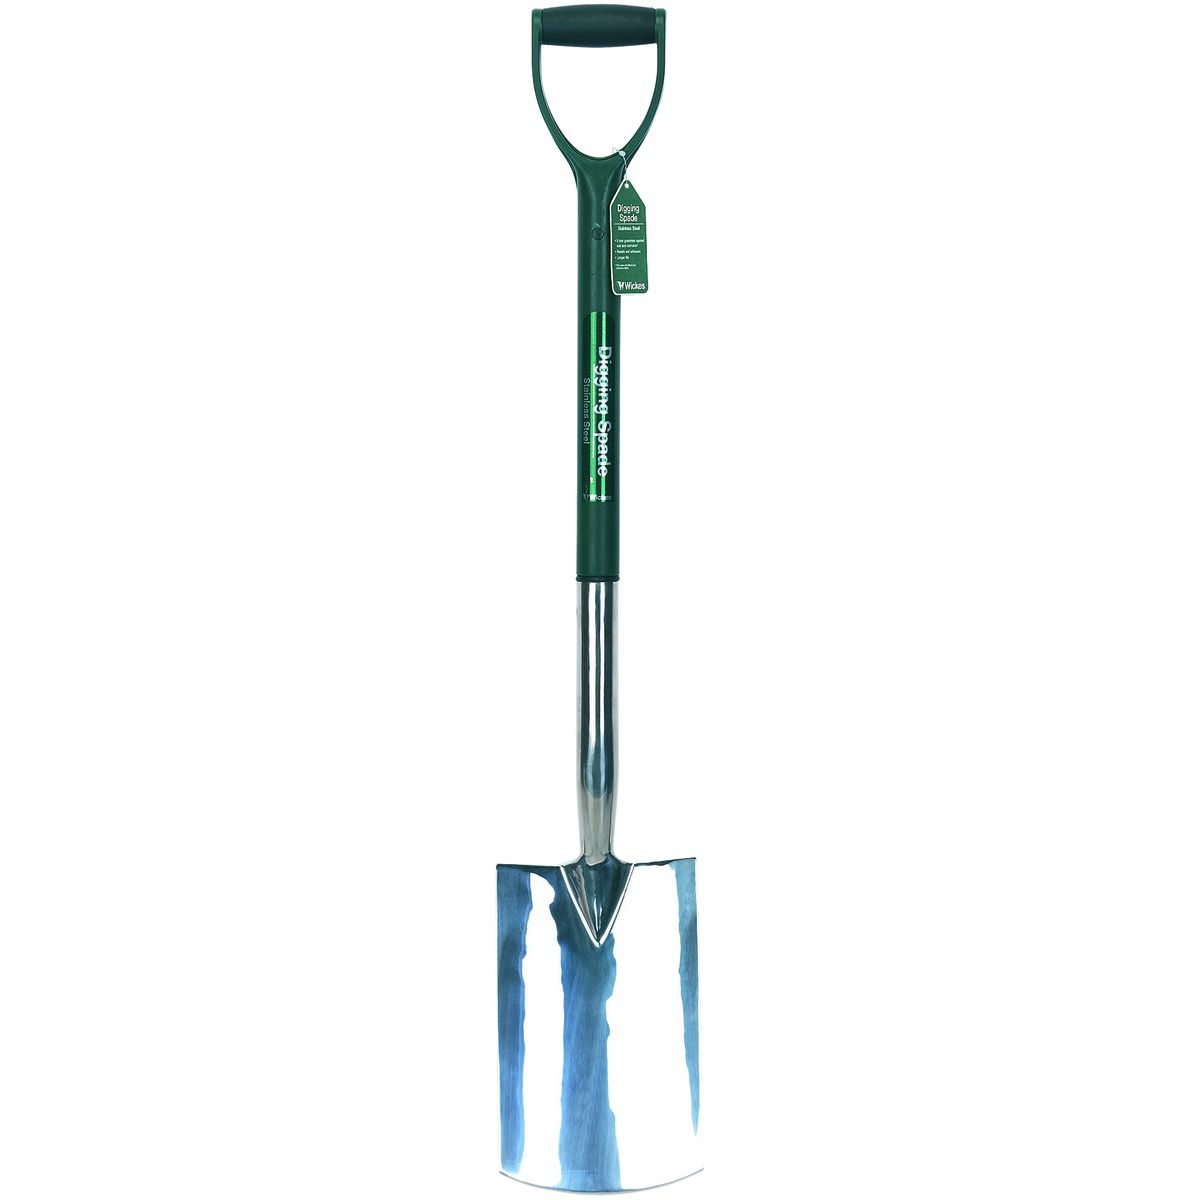 Image of Wickes Stainless Steel Garden Digging Spade - 1000mm